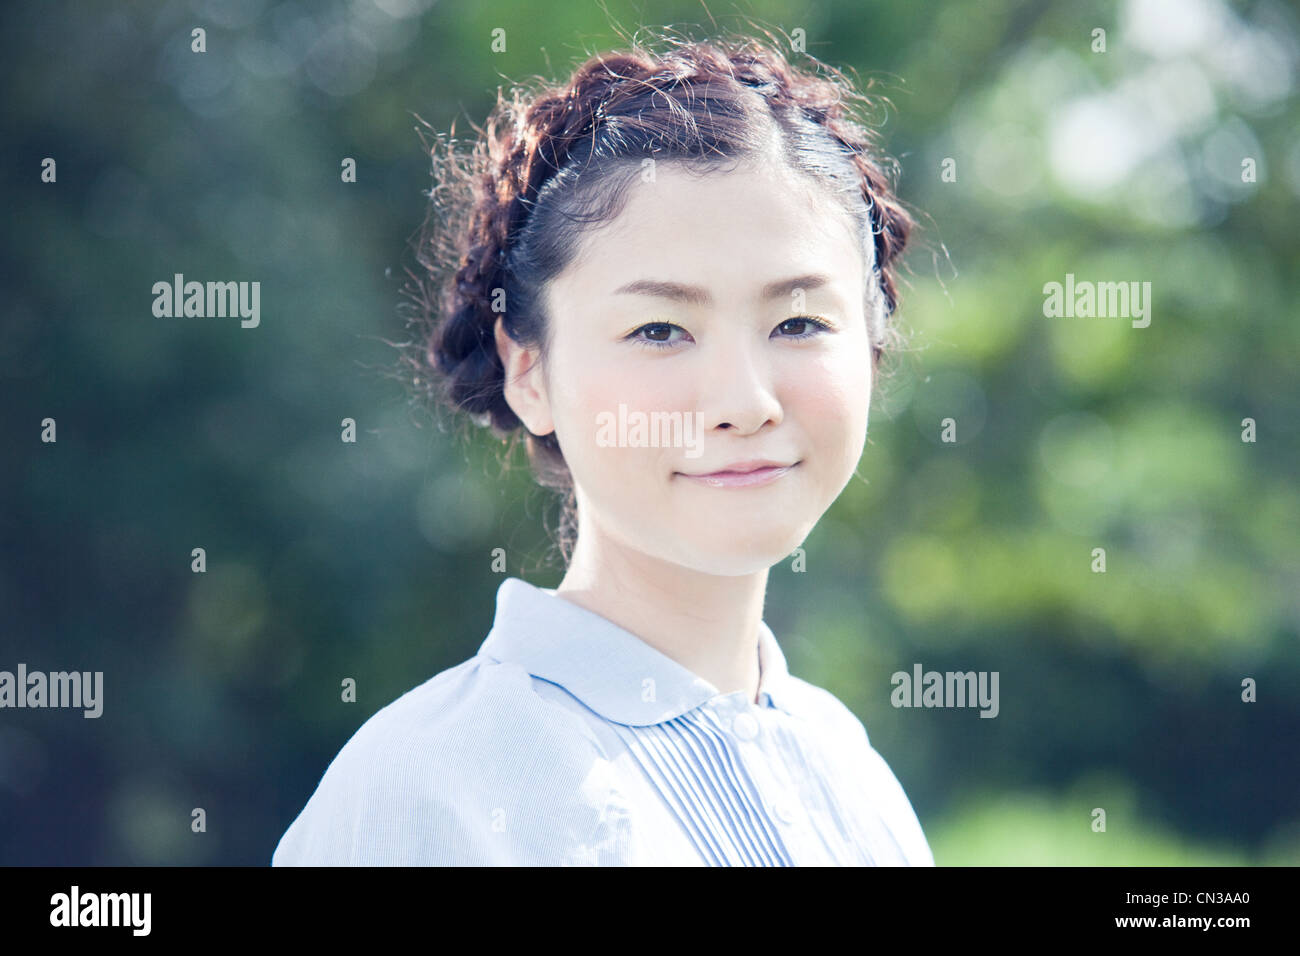 https://c8.alamy.com/comp/CN3AA0/young-woman-with-plaited-hair-portrait-CN3AA0.jpg